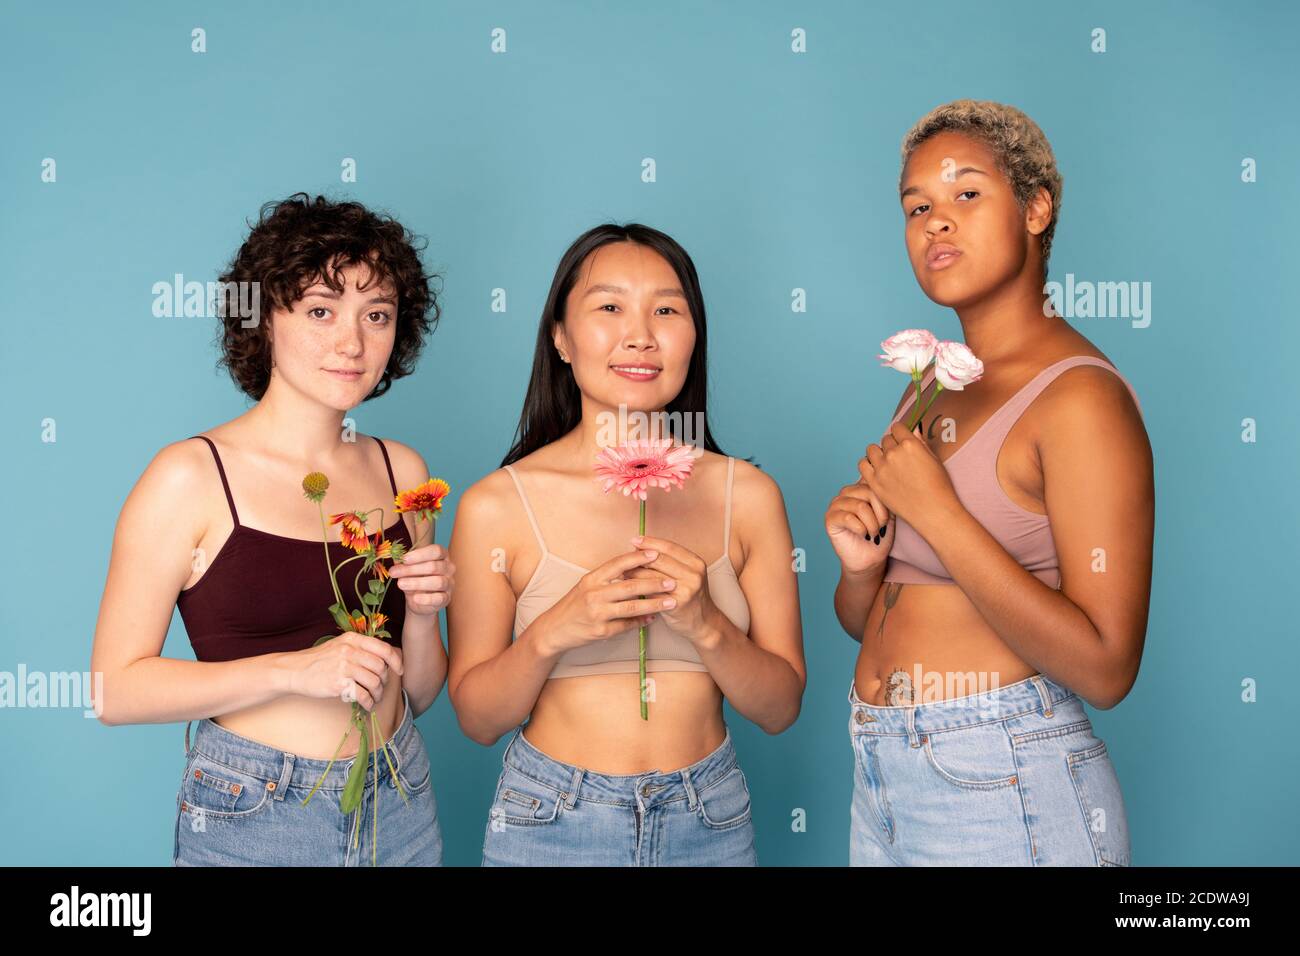 Three young pretty women in tanktops and blue jeans holding fresh flowers Stock Photo